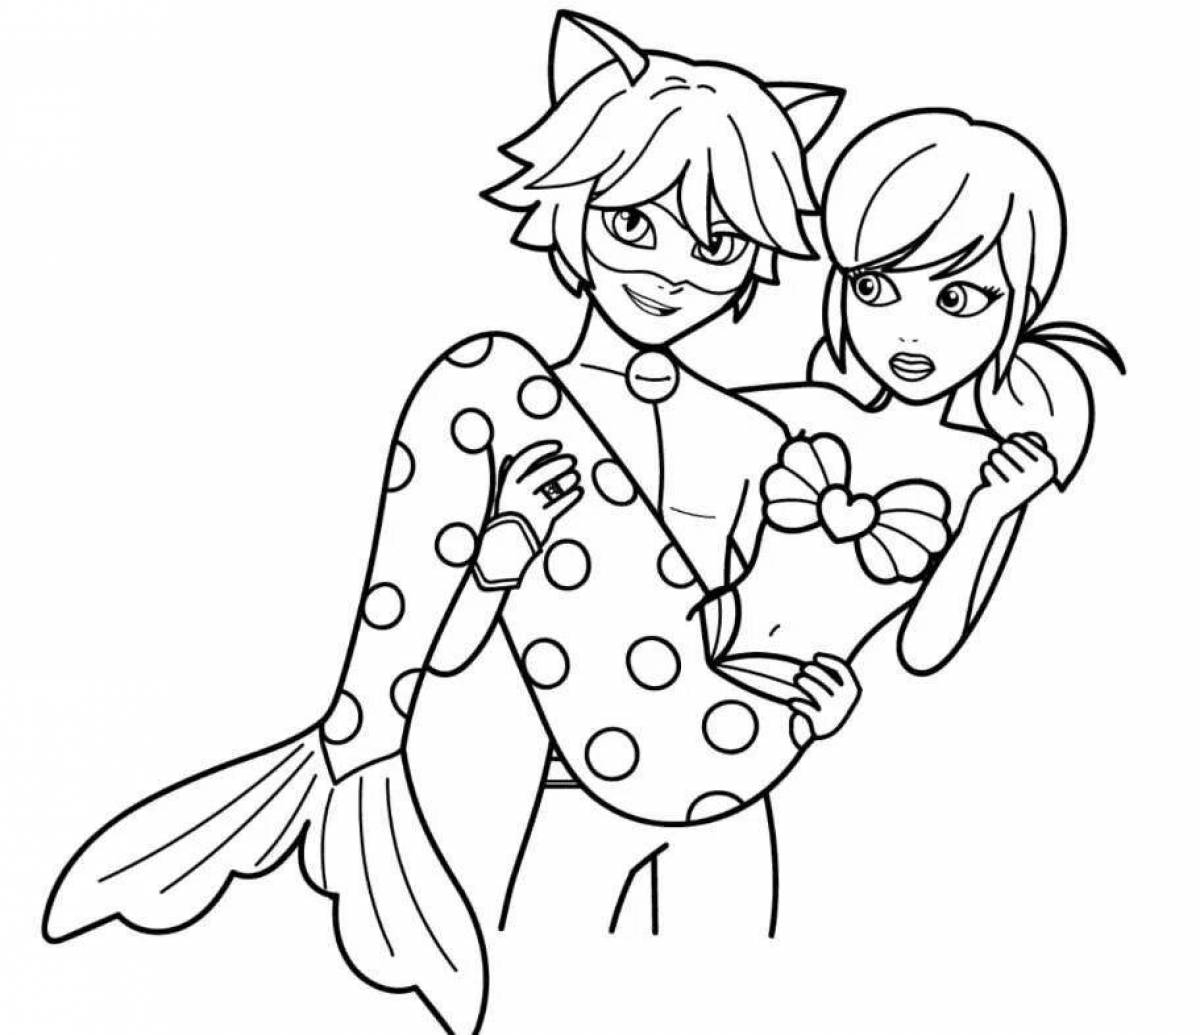 Lady bug team playful coloring page